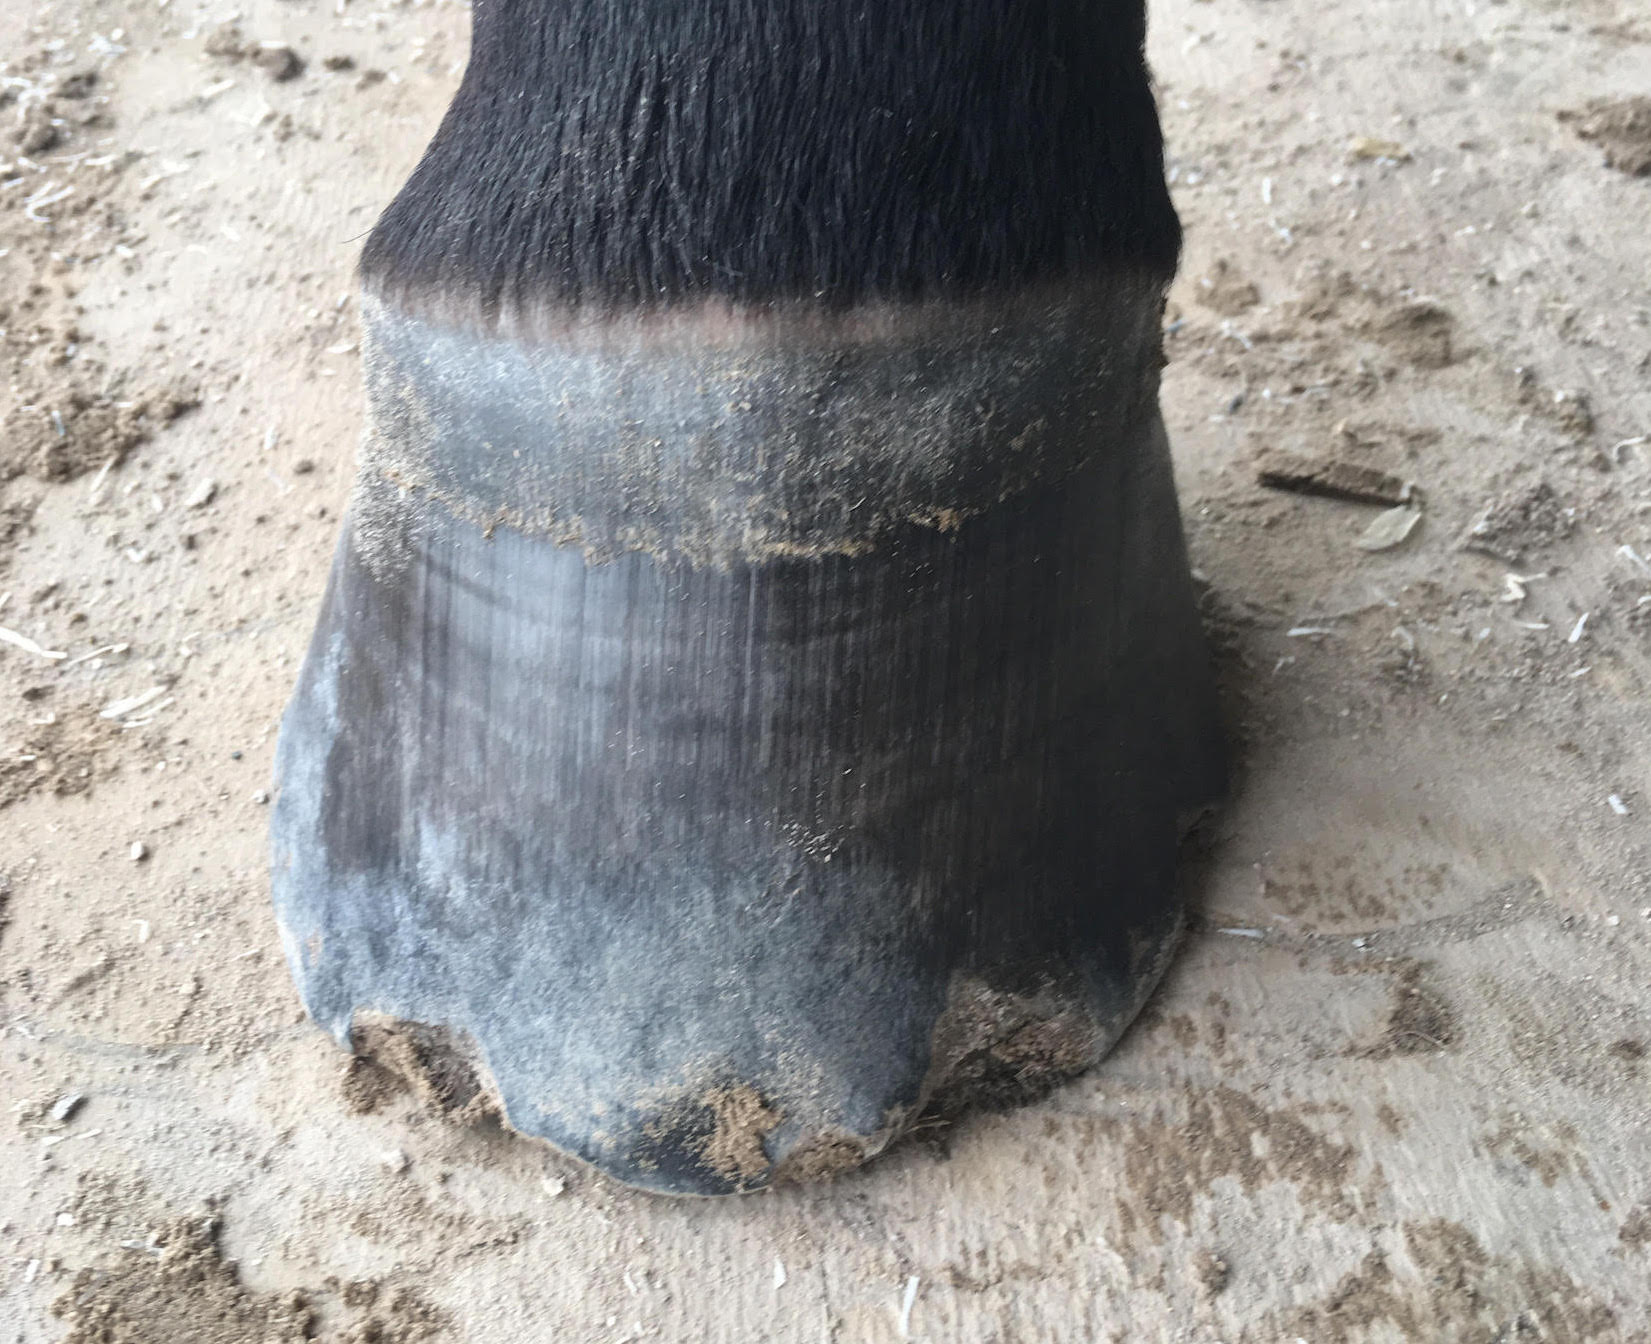 The front view of a hoof of a horse without shoes. Longer parts have been naturally chipped away and a natural shoe has started to form